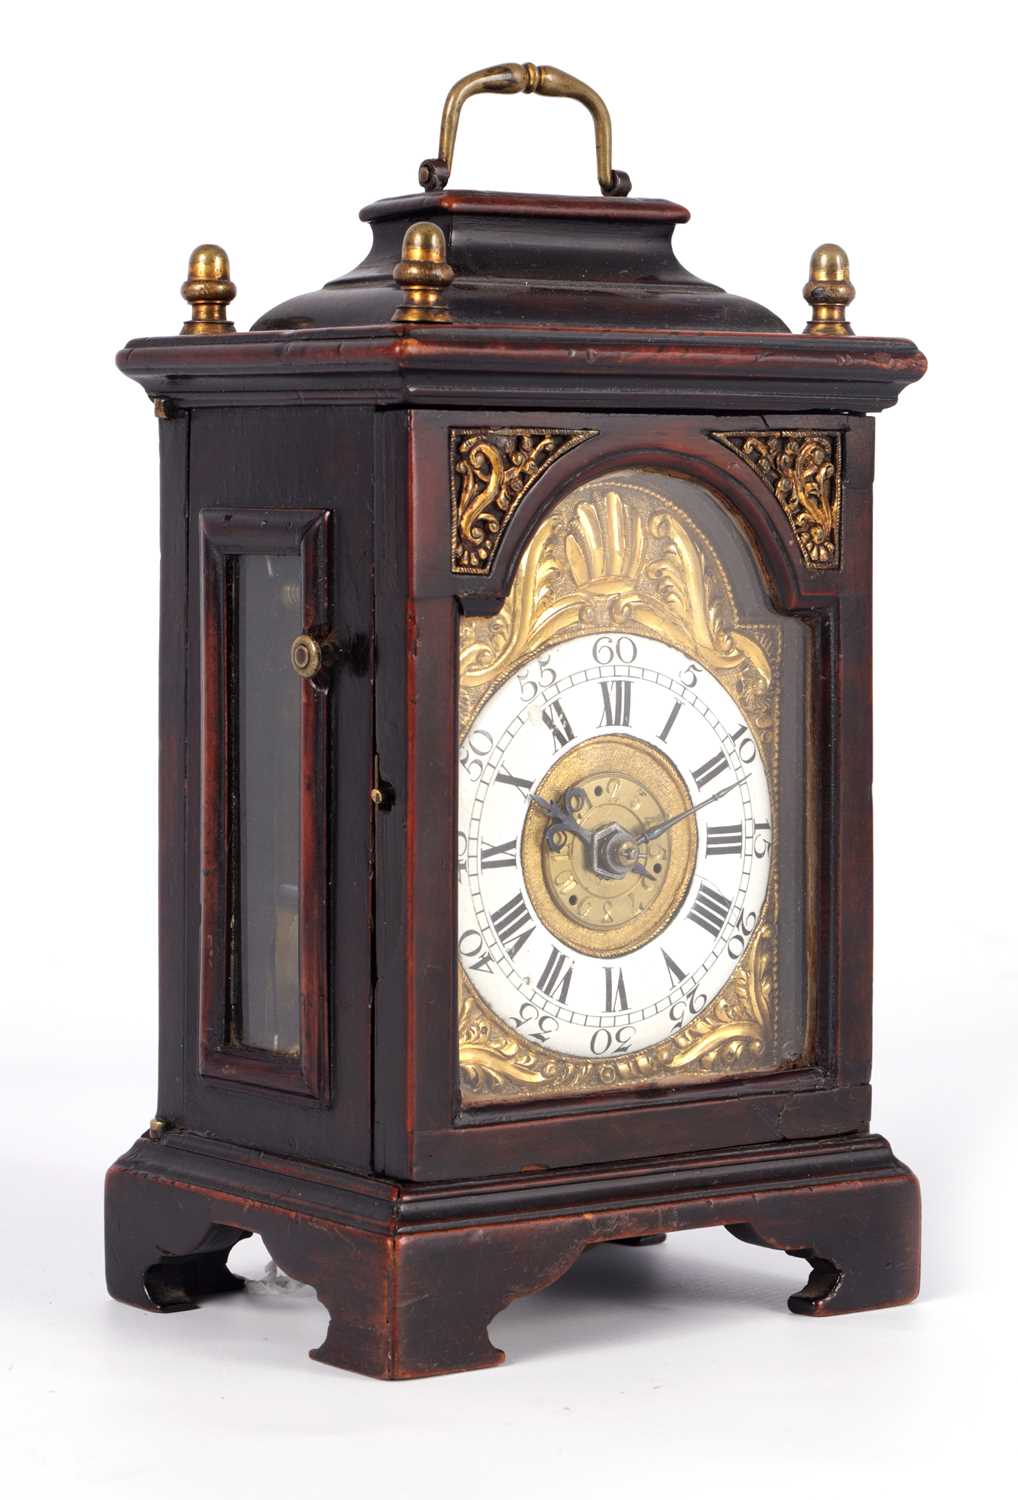 Lot 863 - A VERY RARE MID 18TH CENTURY MINIATURE FUSEE BRACKET CLOCK, POSSIBLY AUSTRIAN